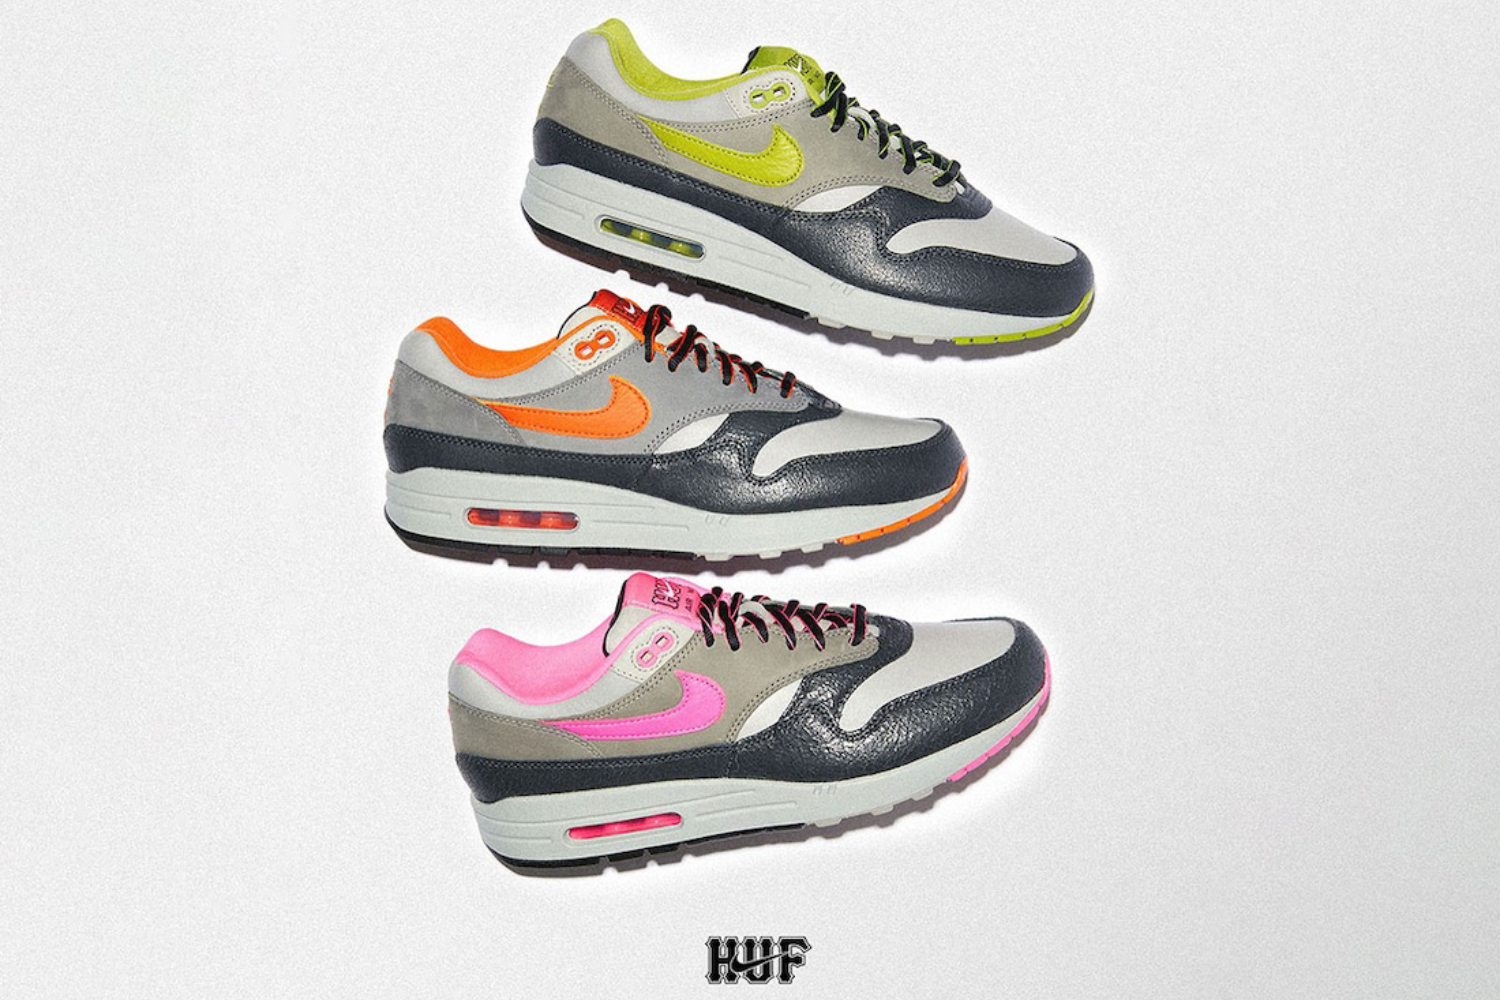 HUF reveals details of the Nike Air Max 1 release